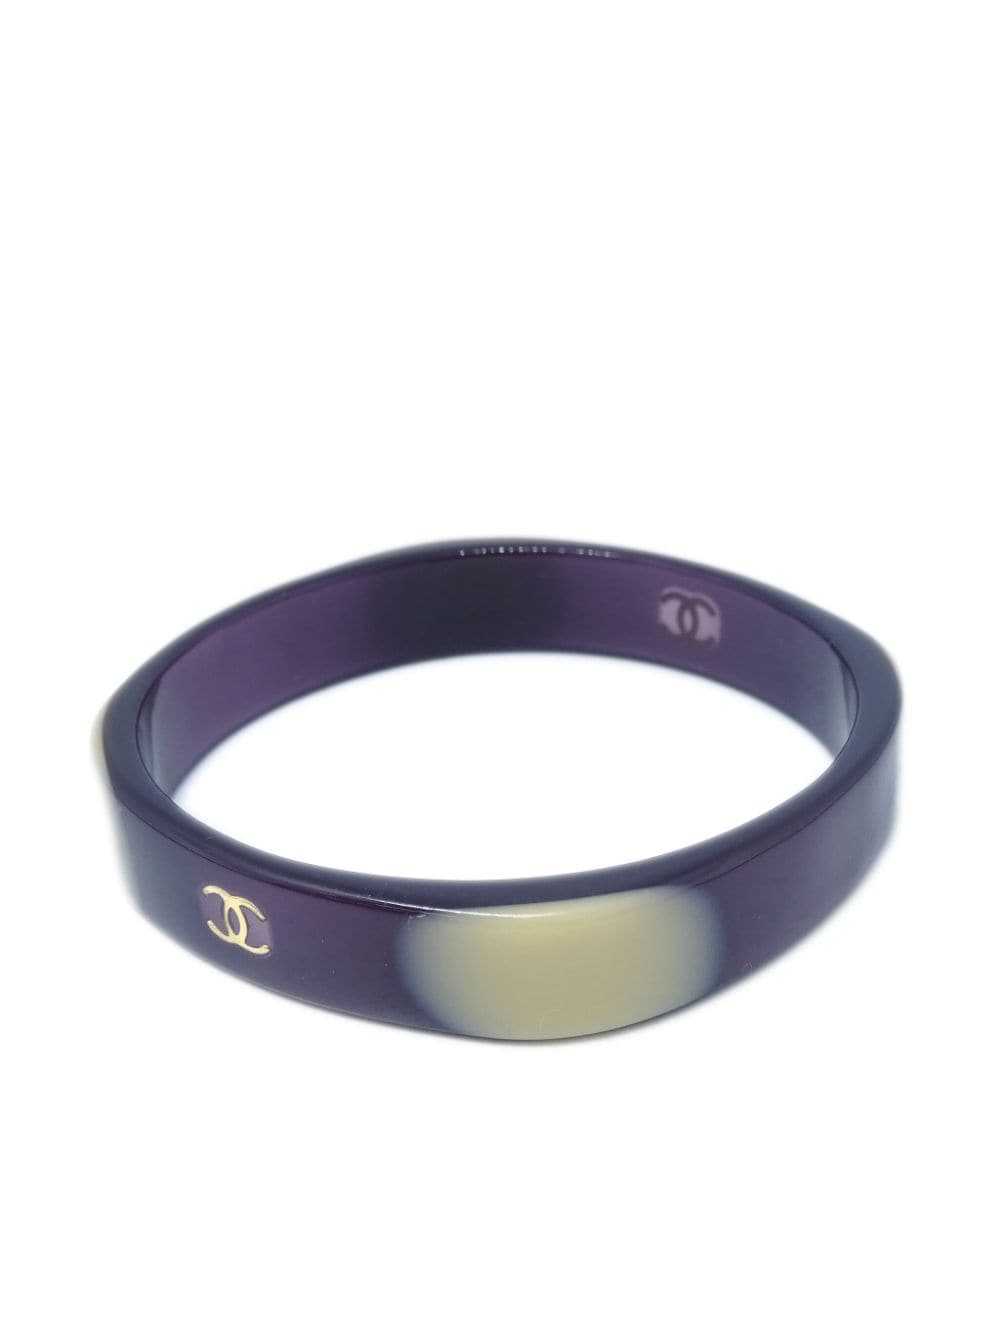 CHANEL Pre-Owned 2001 CC-stamp square bangle - Pu… - image 2